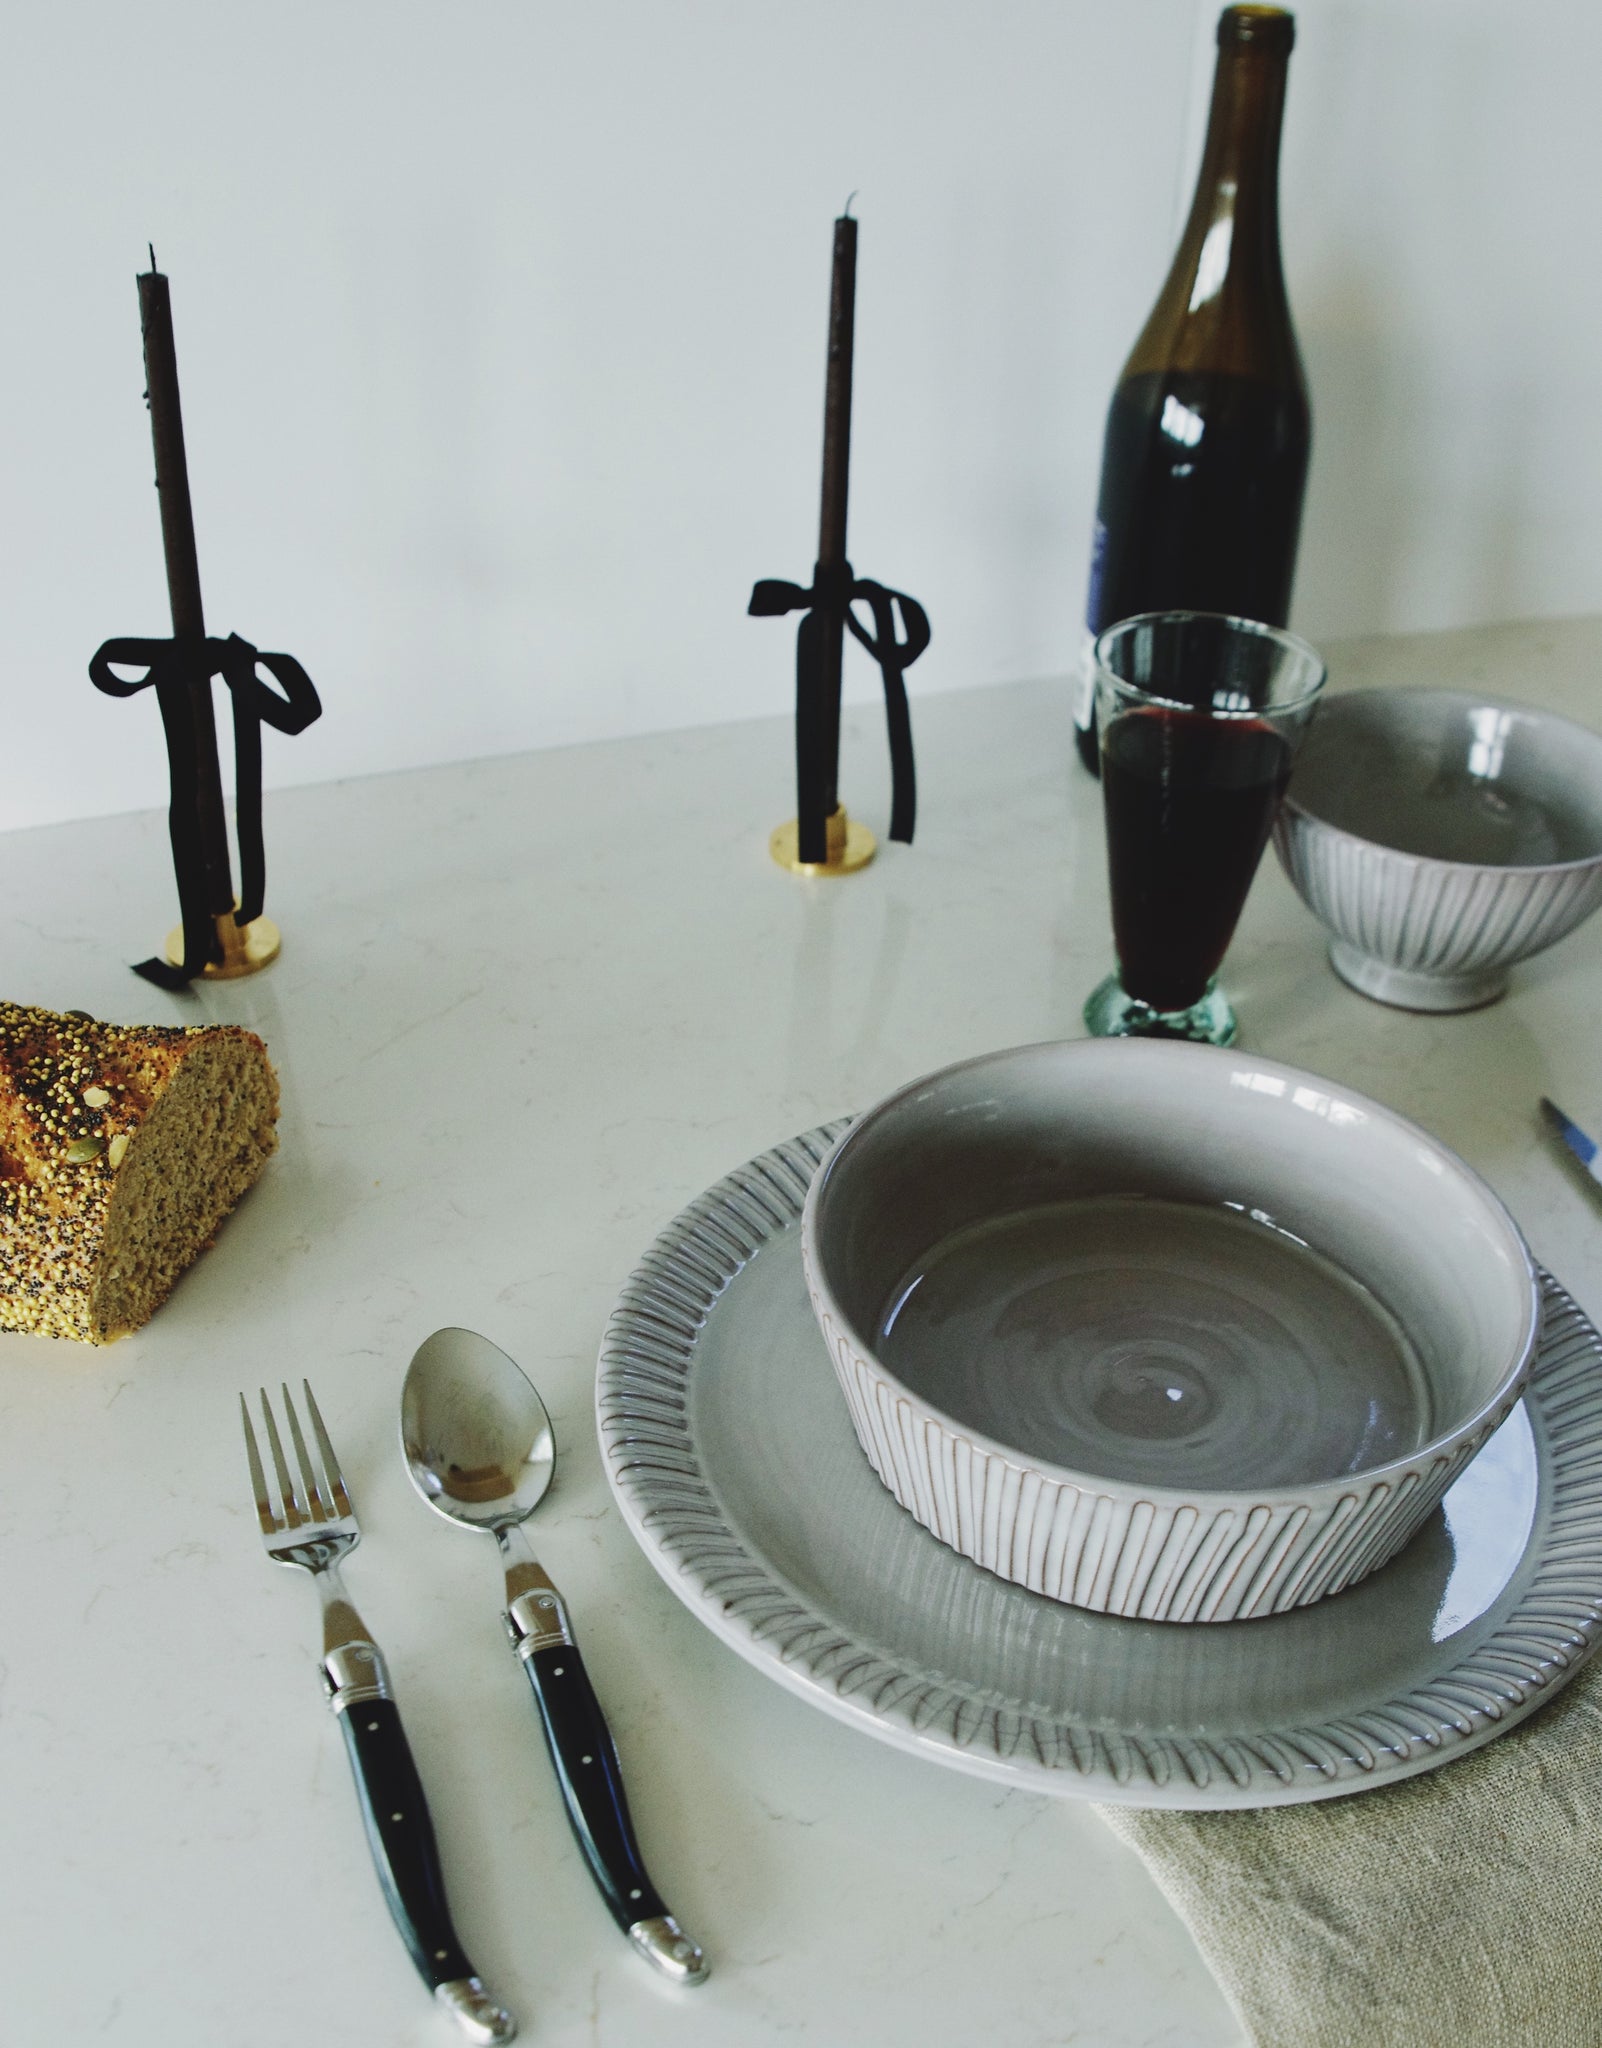 Grey ceramic pasta bowl and plate with ribbed edges. Next to it are black cutlery, bread, taper candles tied with ribbon, a wine bottle and glass.